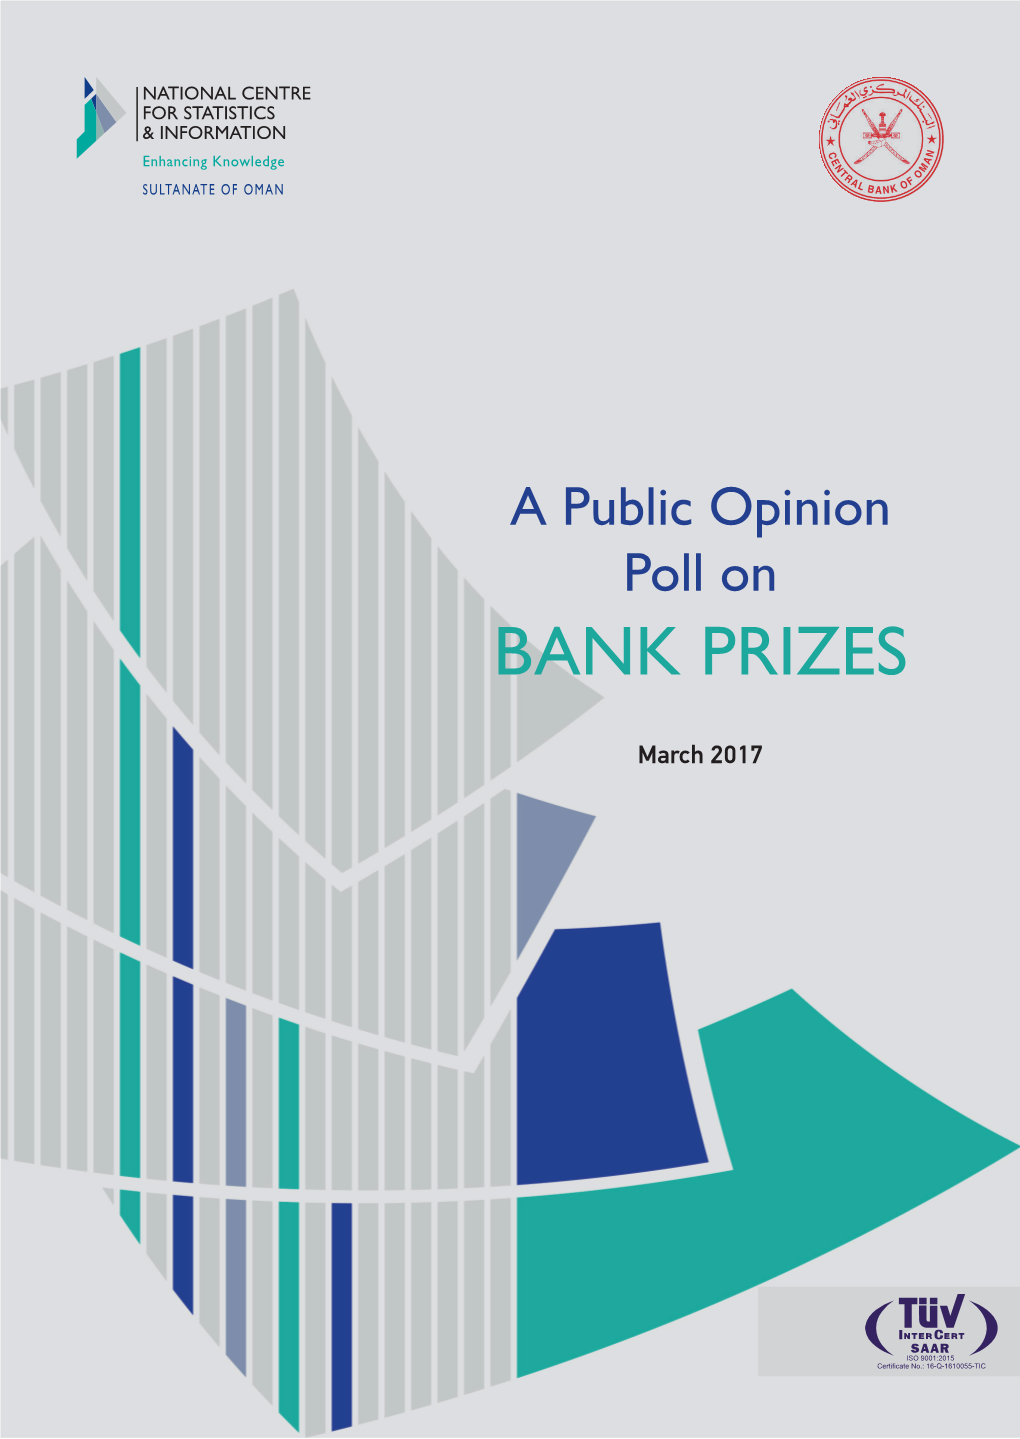 A Public Opinion Poll on BANK PRIZES